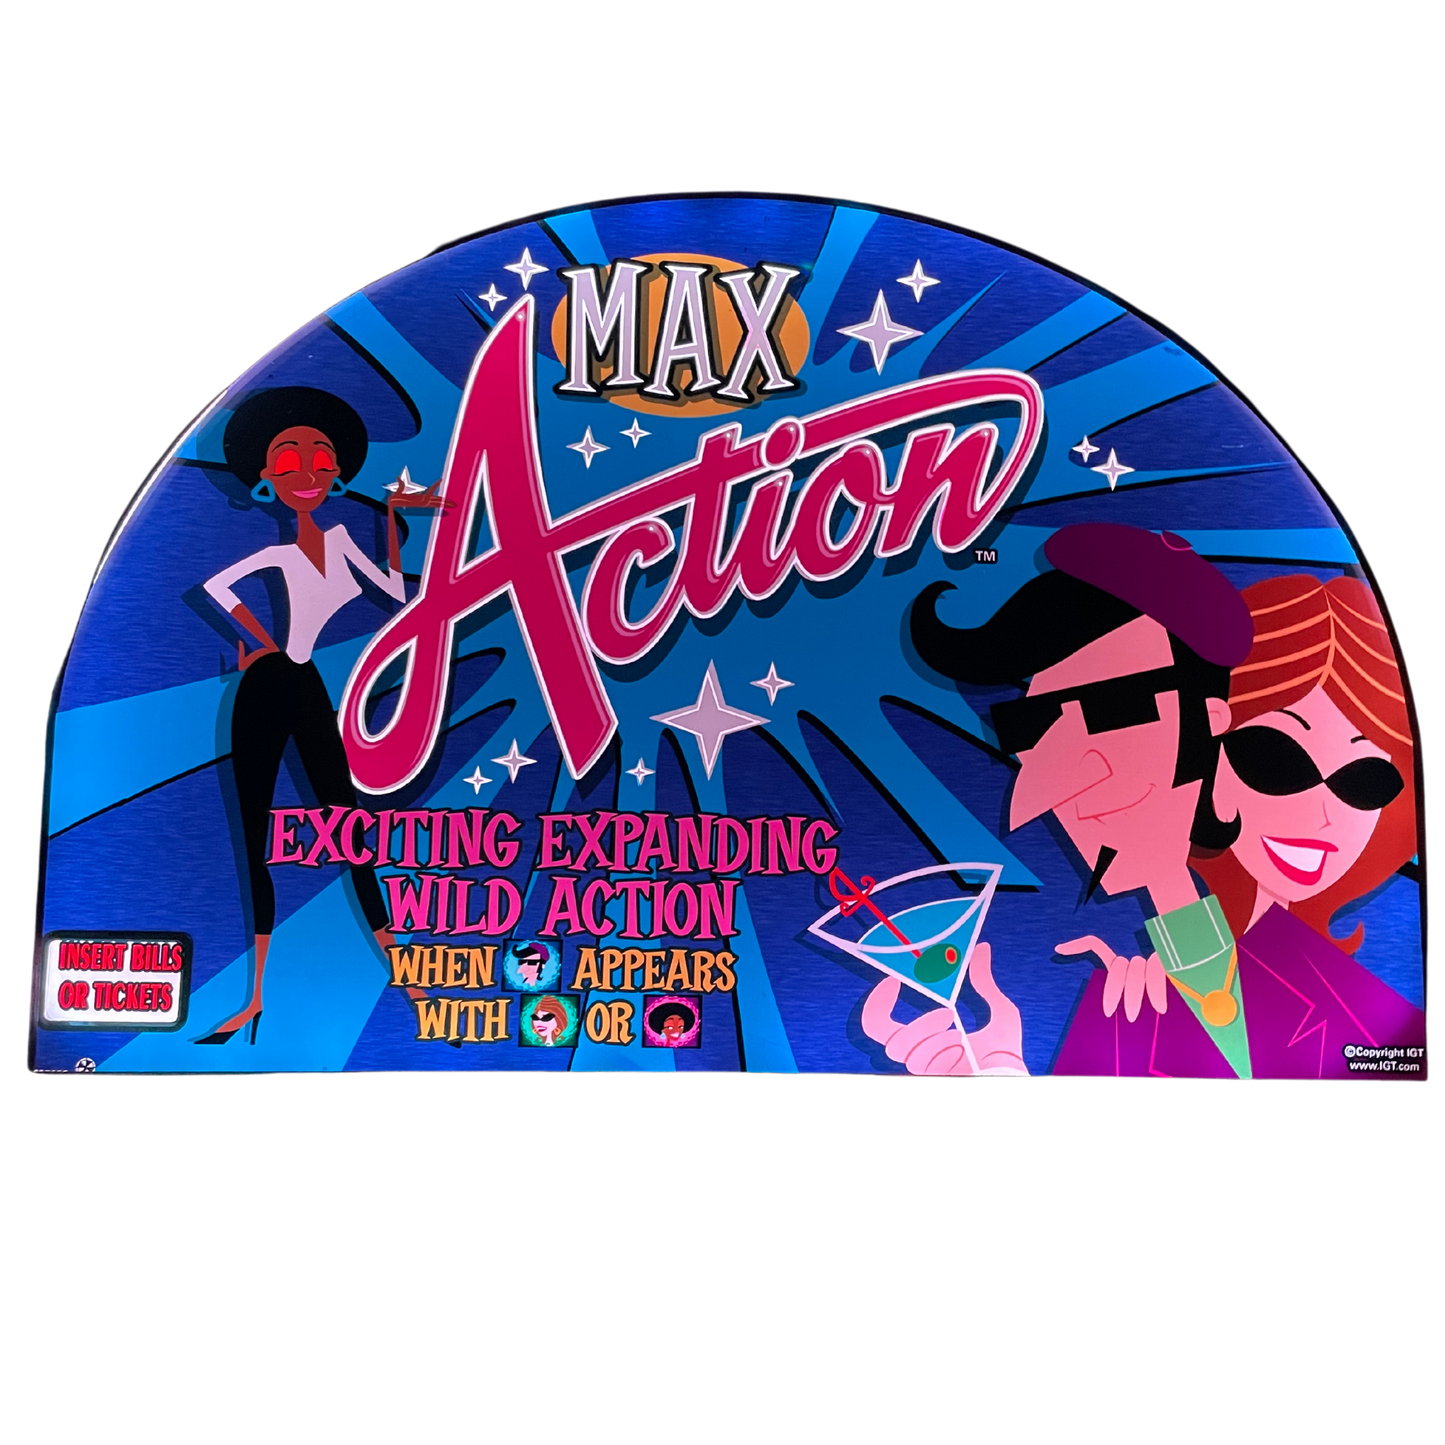 Max Action Slot Glass